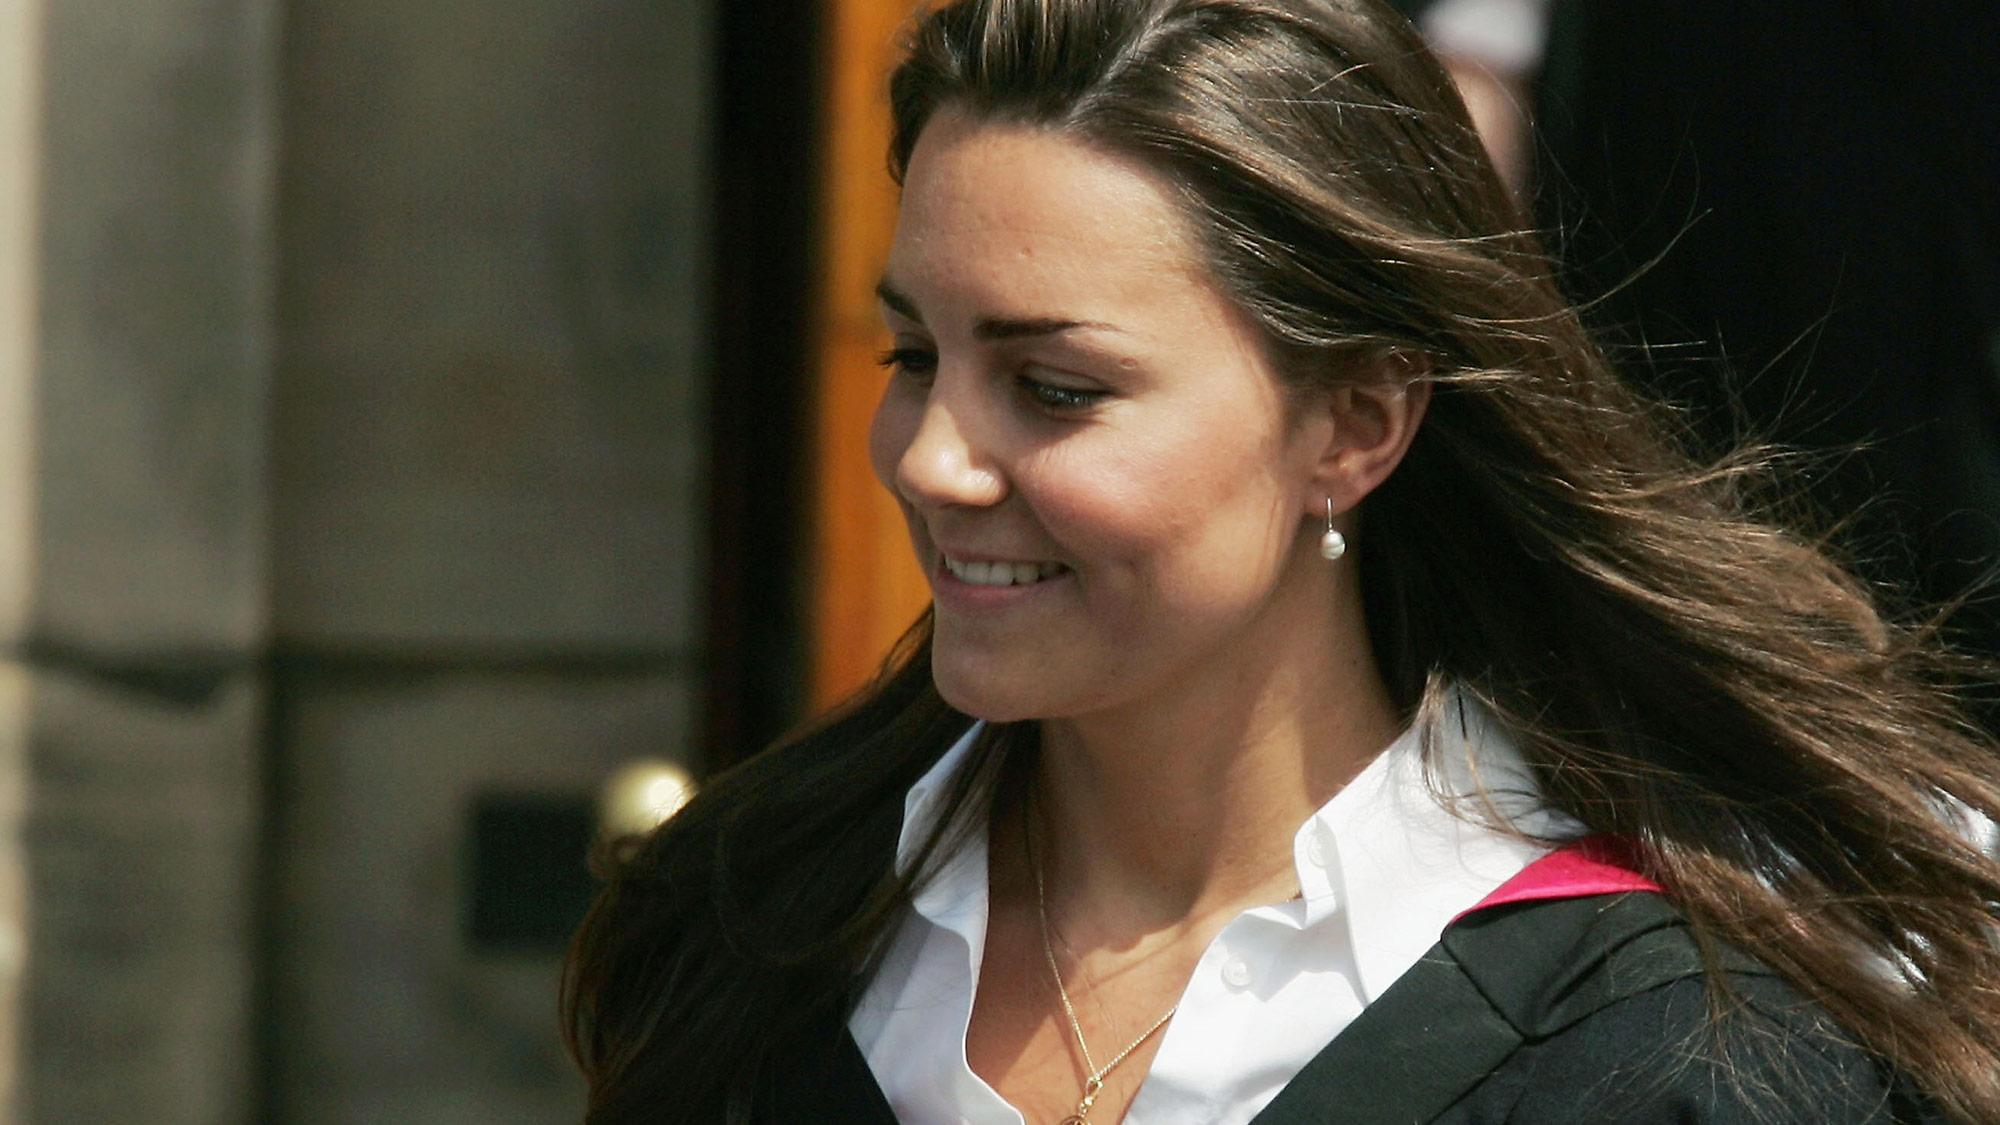 The ring Prince William gave Kate before she graduated is rather symbolic